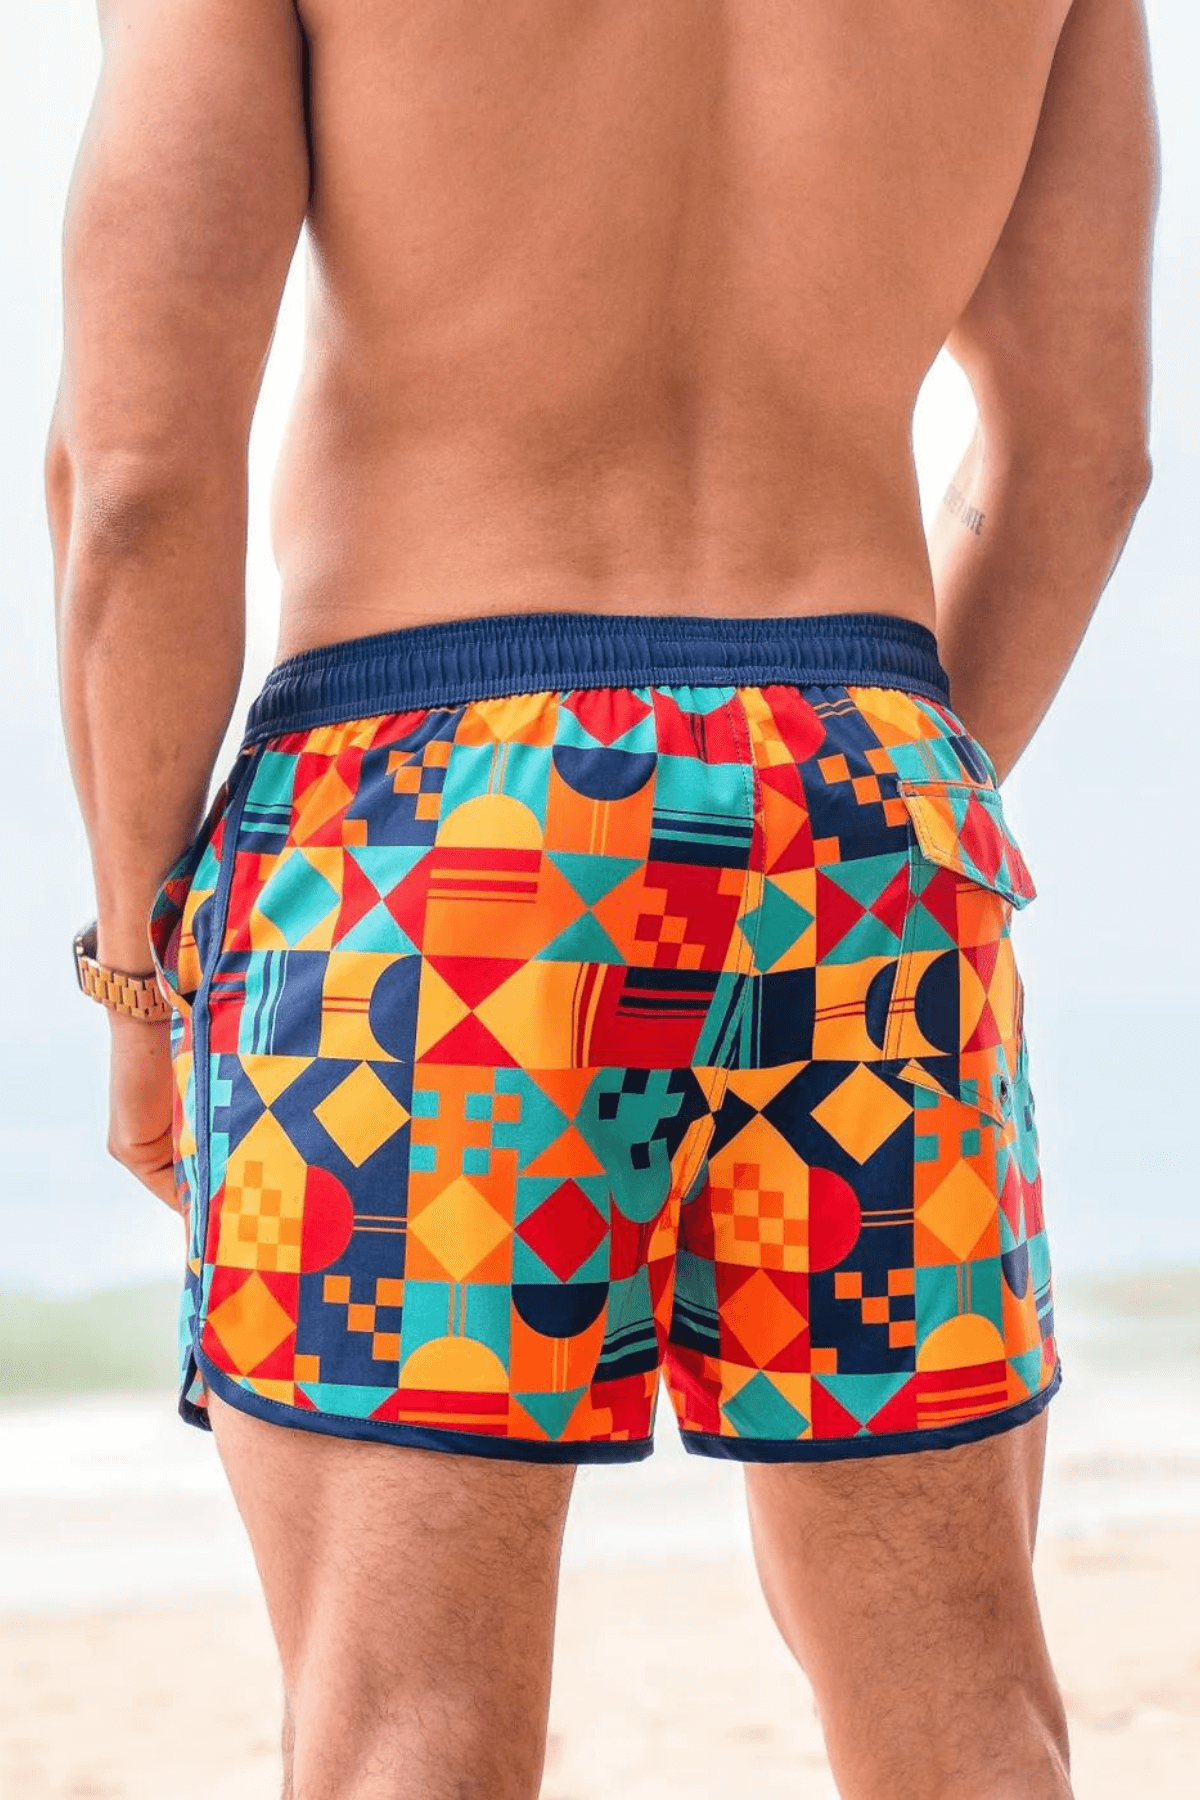 Maamgic Vintage Stretch Trunks Colorful Geometry